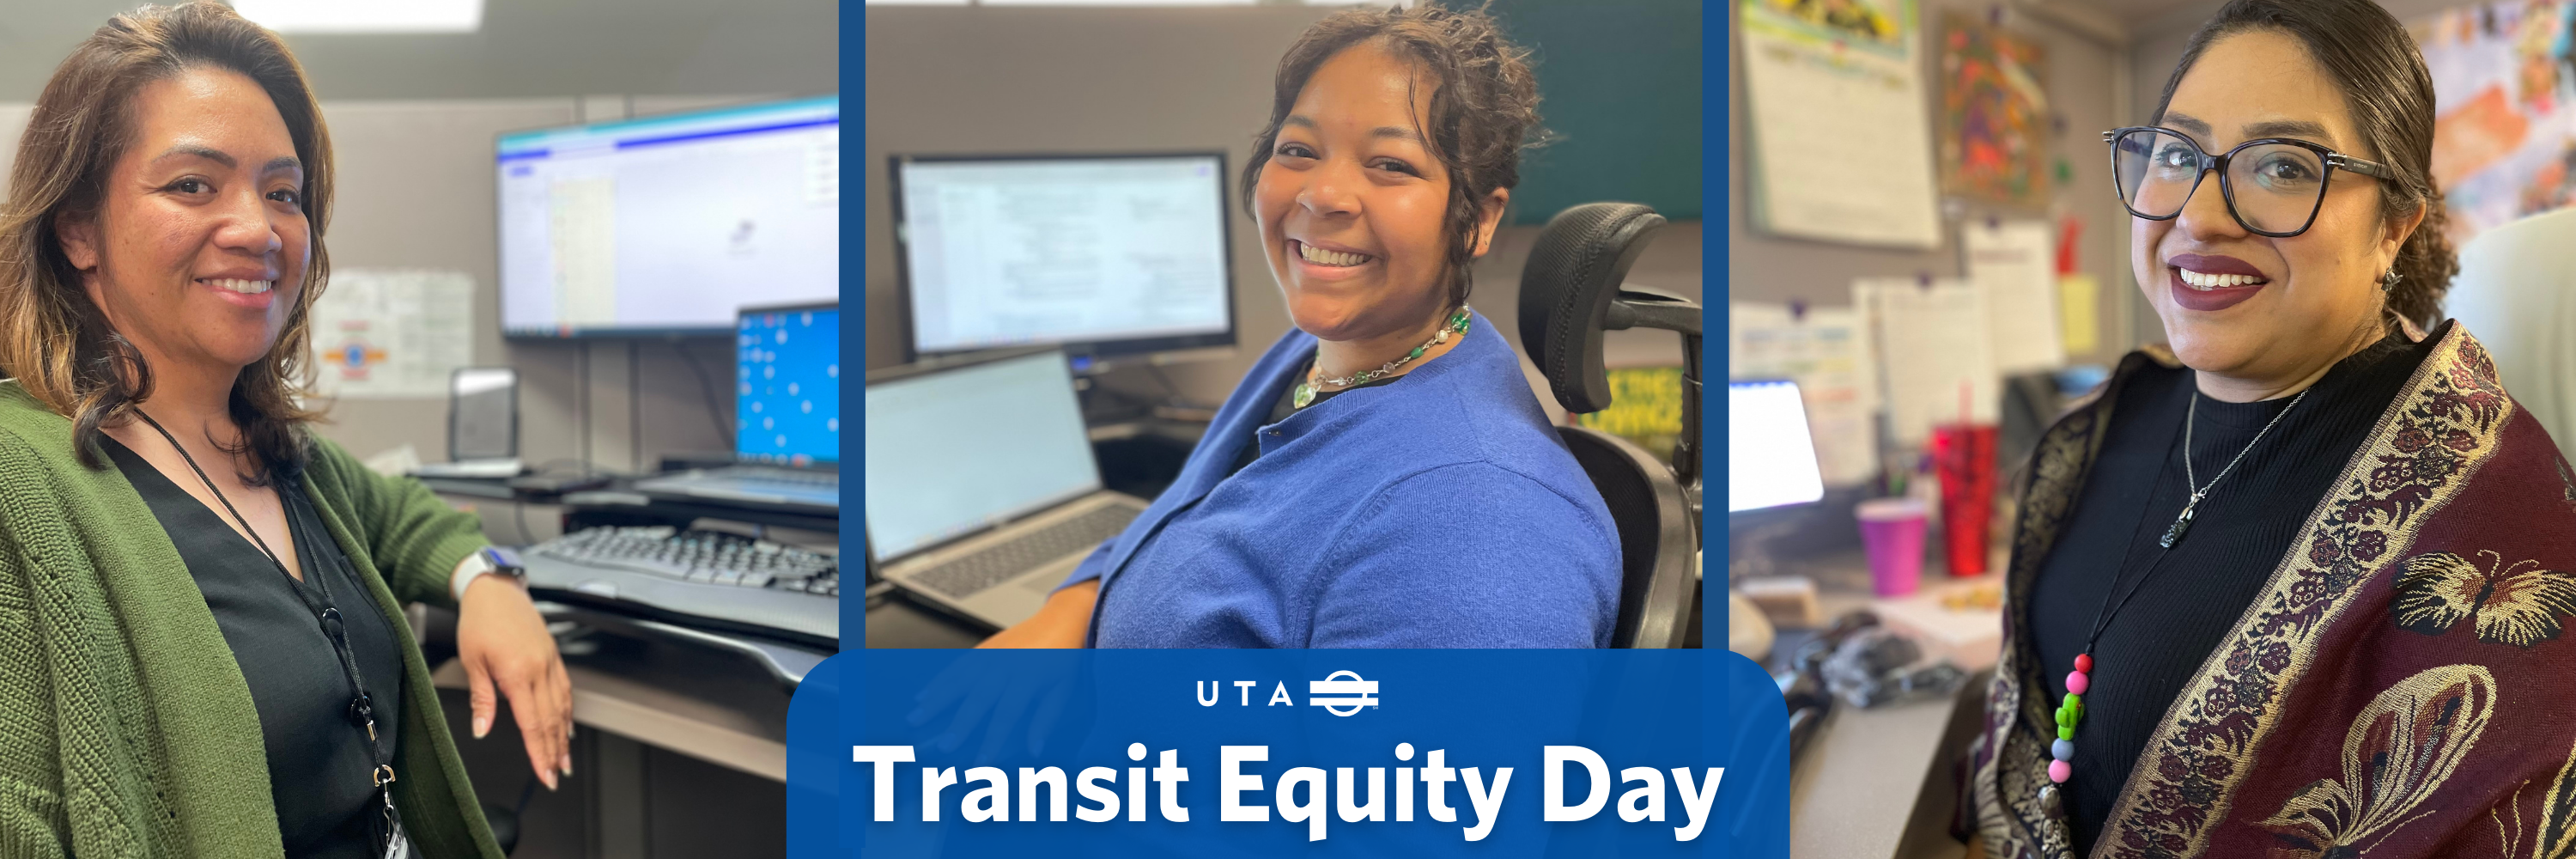 Building a More Equitable Transit System for All